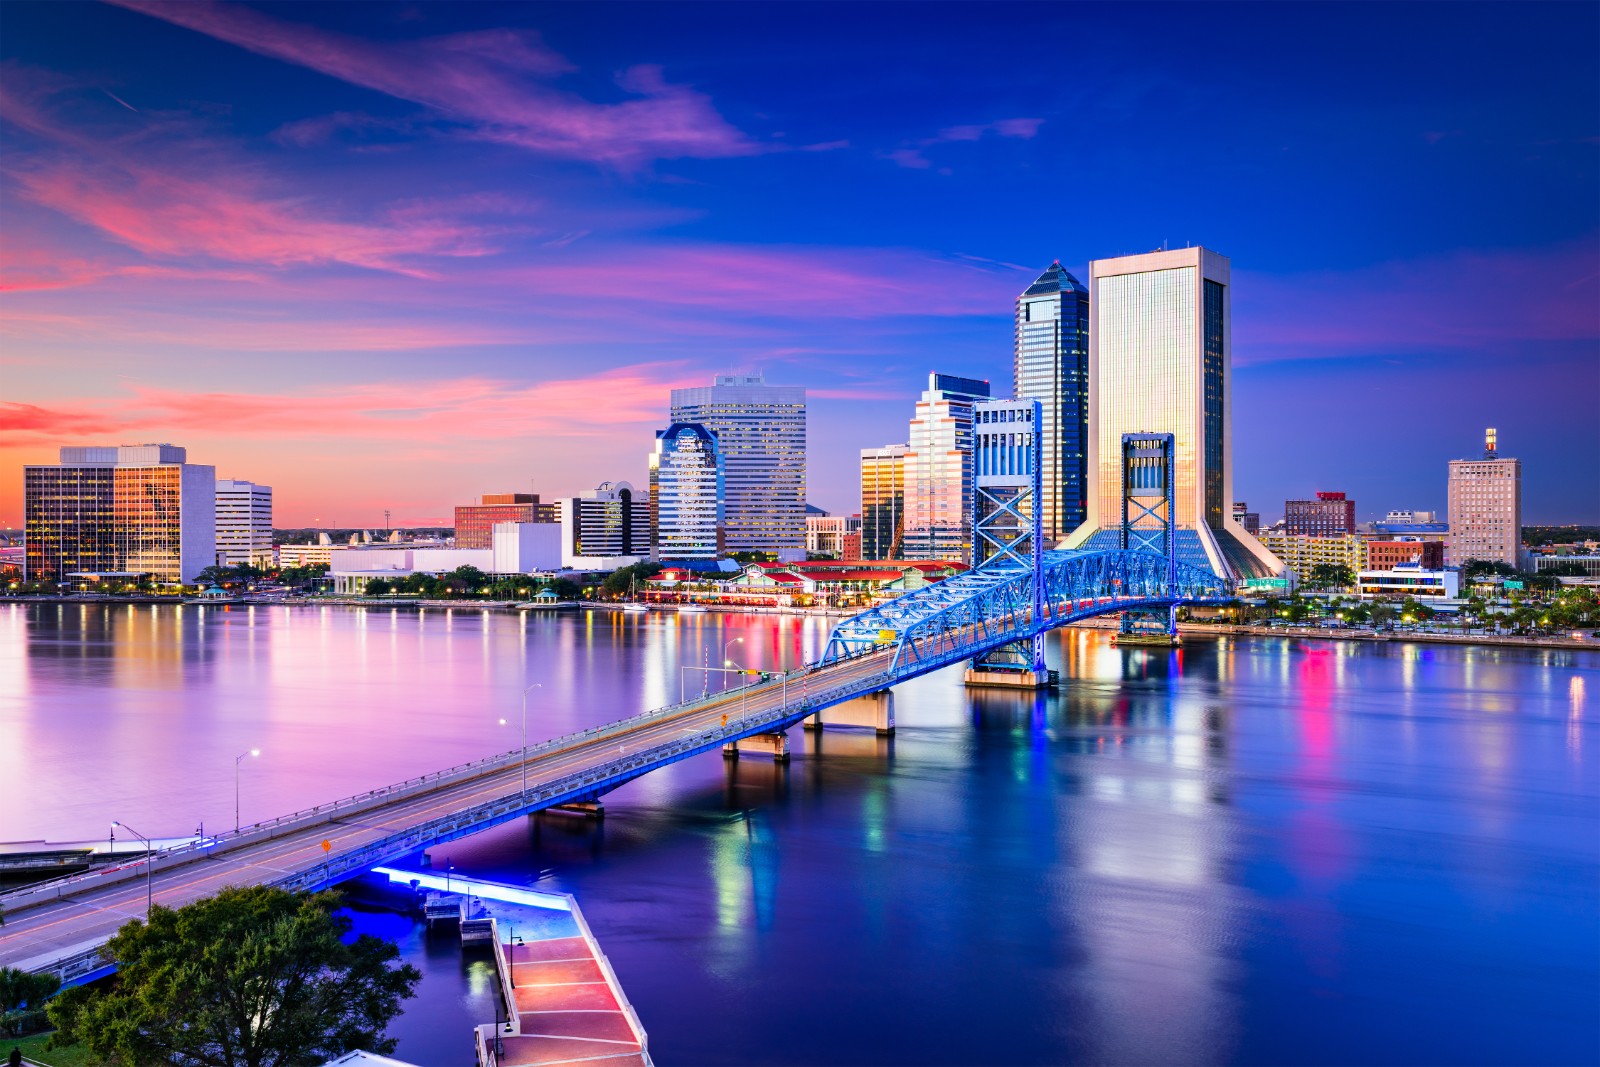 Downtown Jacksonville, Florida skyline at sunset with bridge over river in foreground